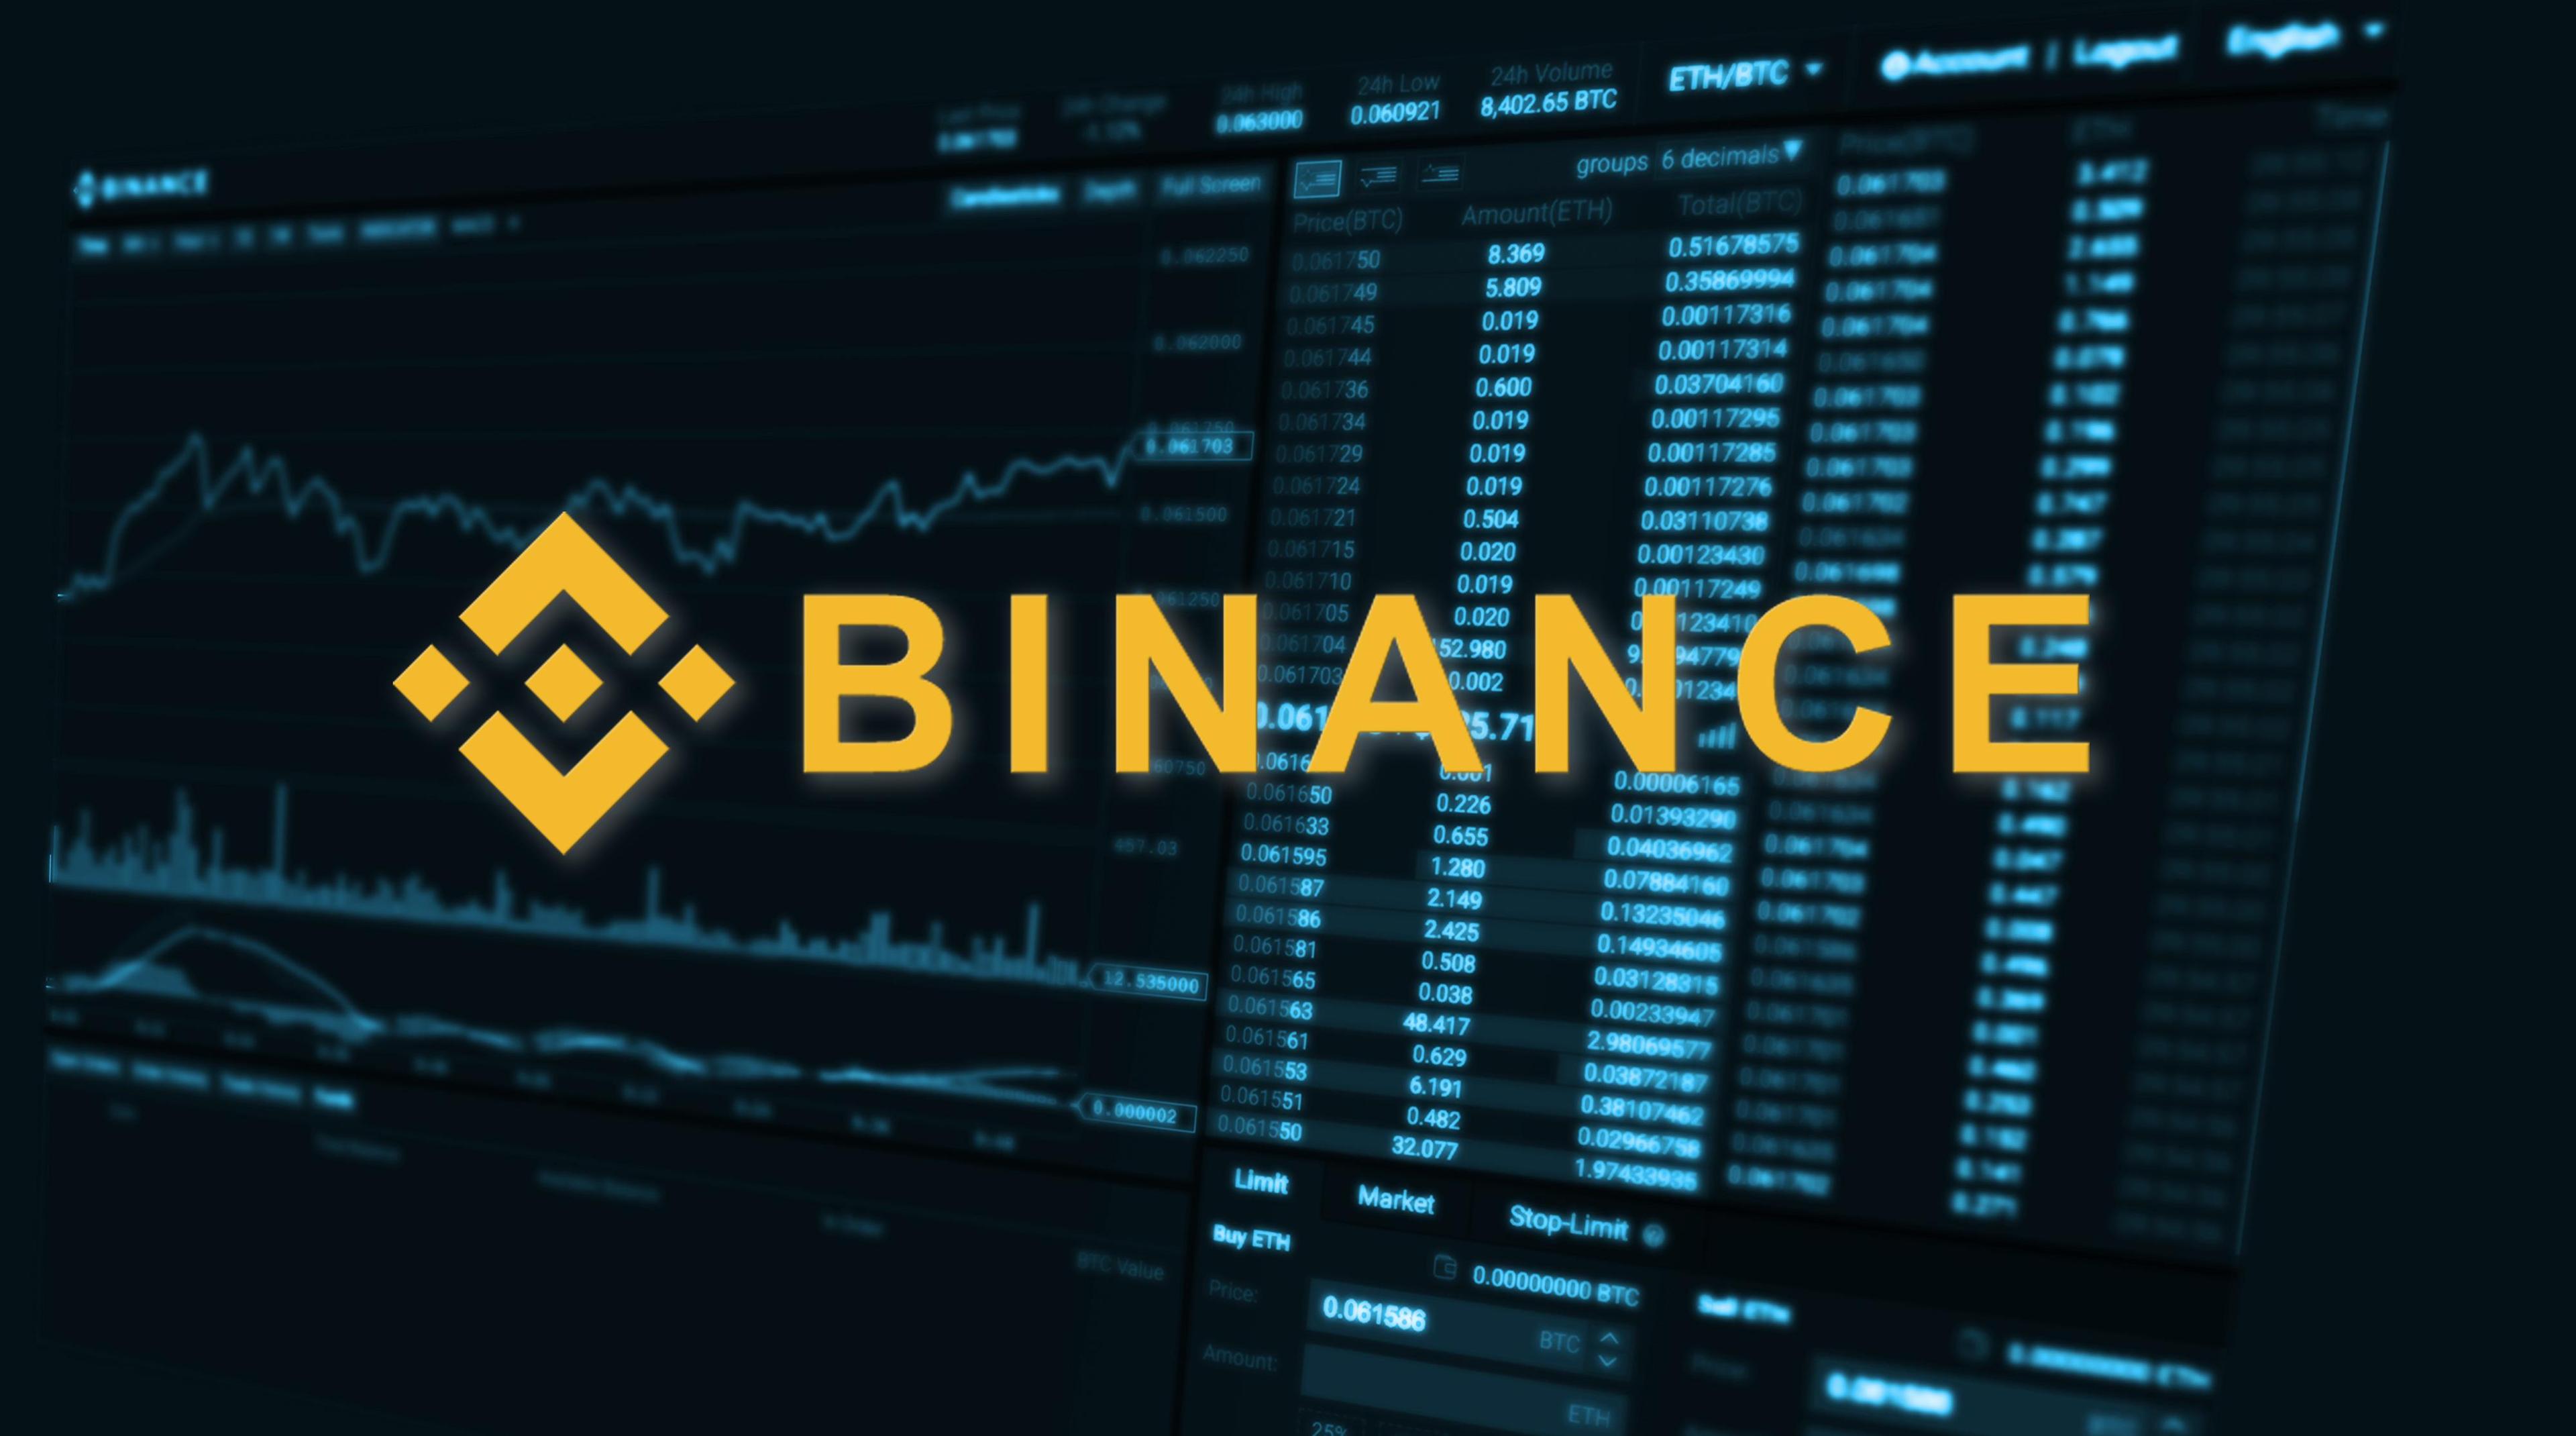 Basic guide to use the Binance interface